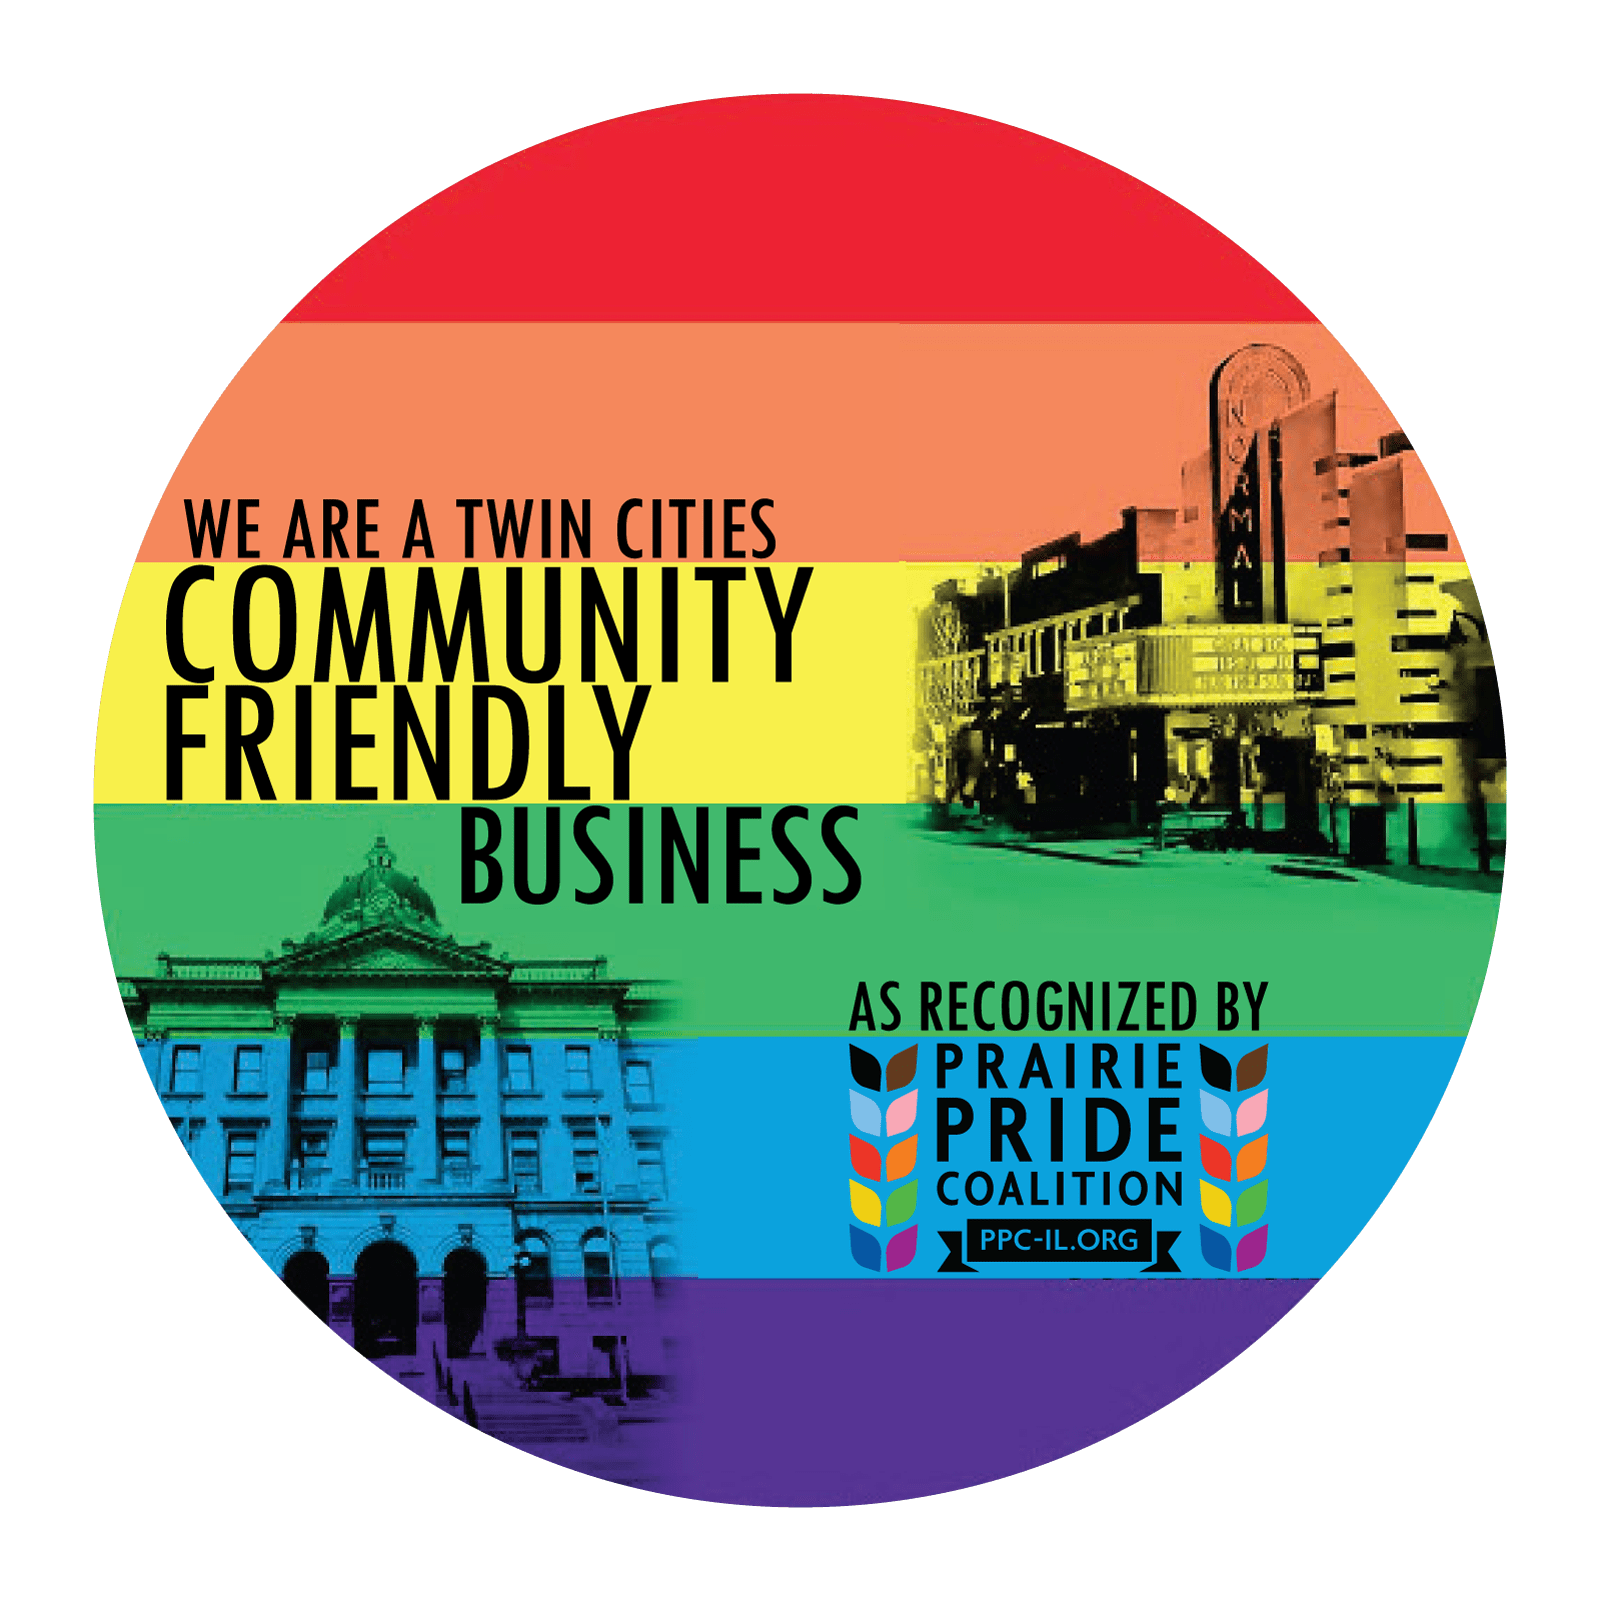 We are a twin cities community friendly business